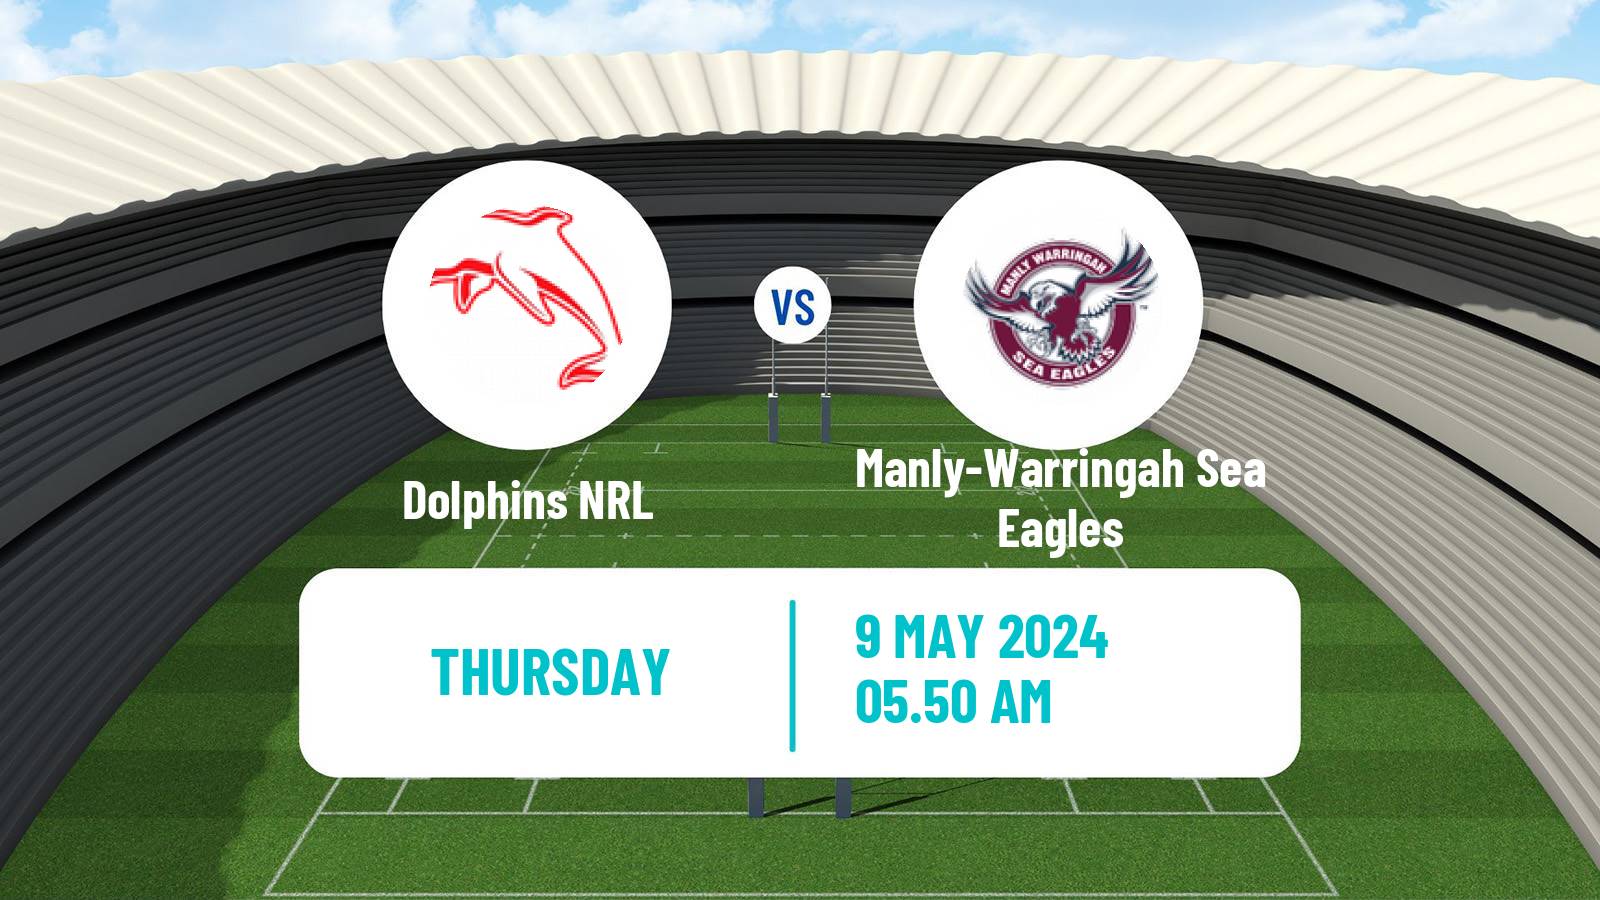 Rugby league Australian NRL Dolphins - Manly-Warringah Sea Eagles